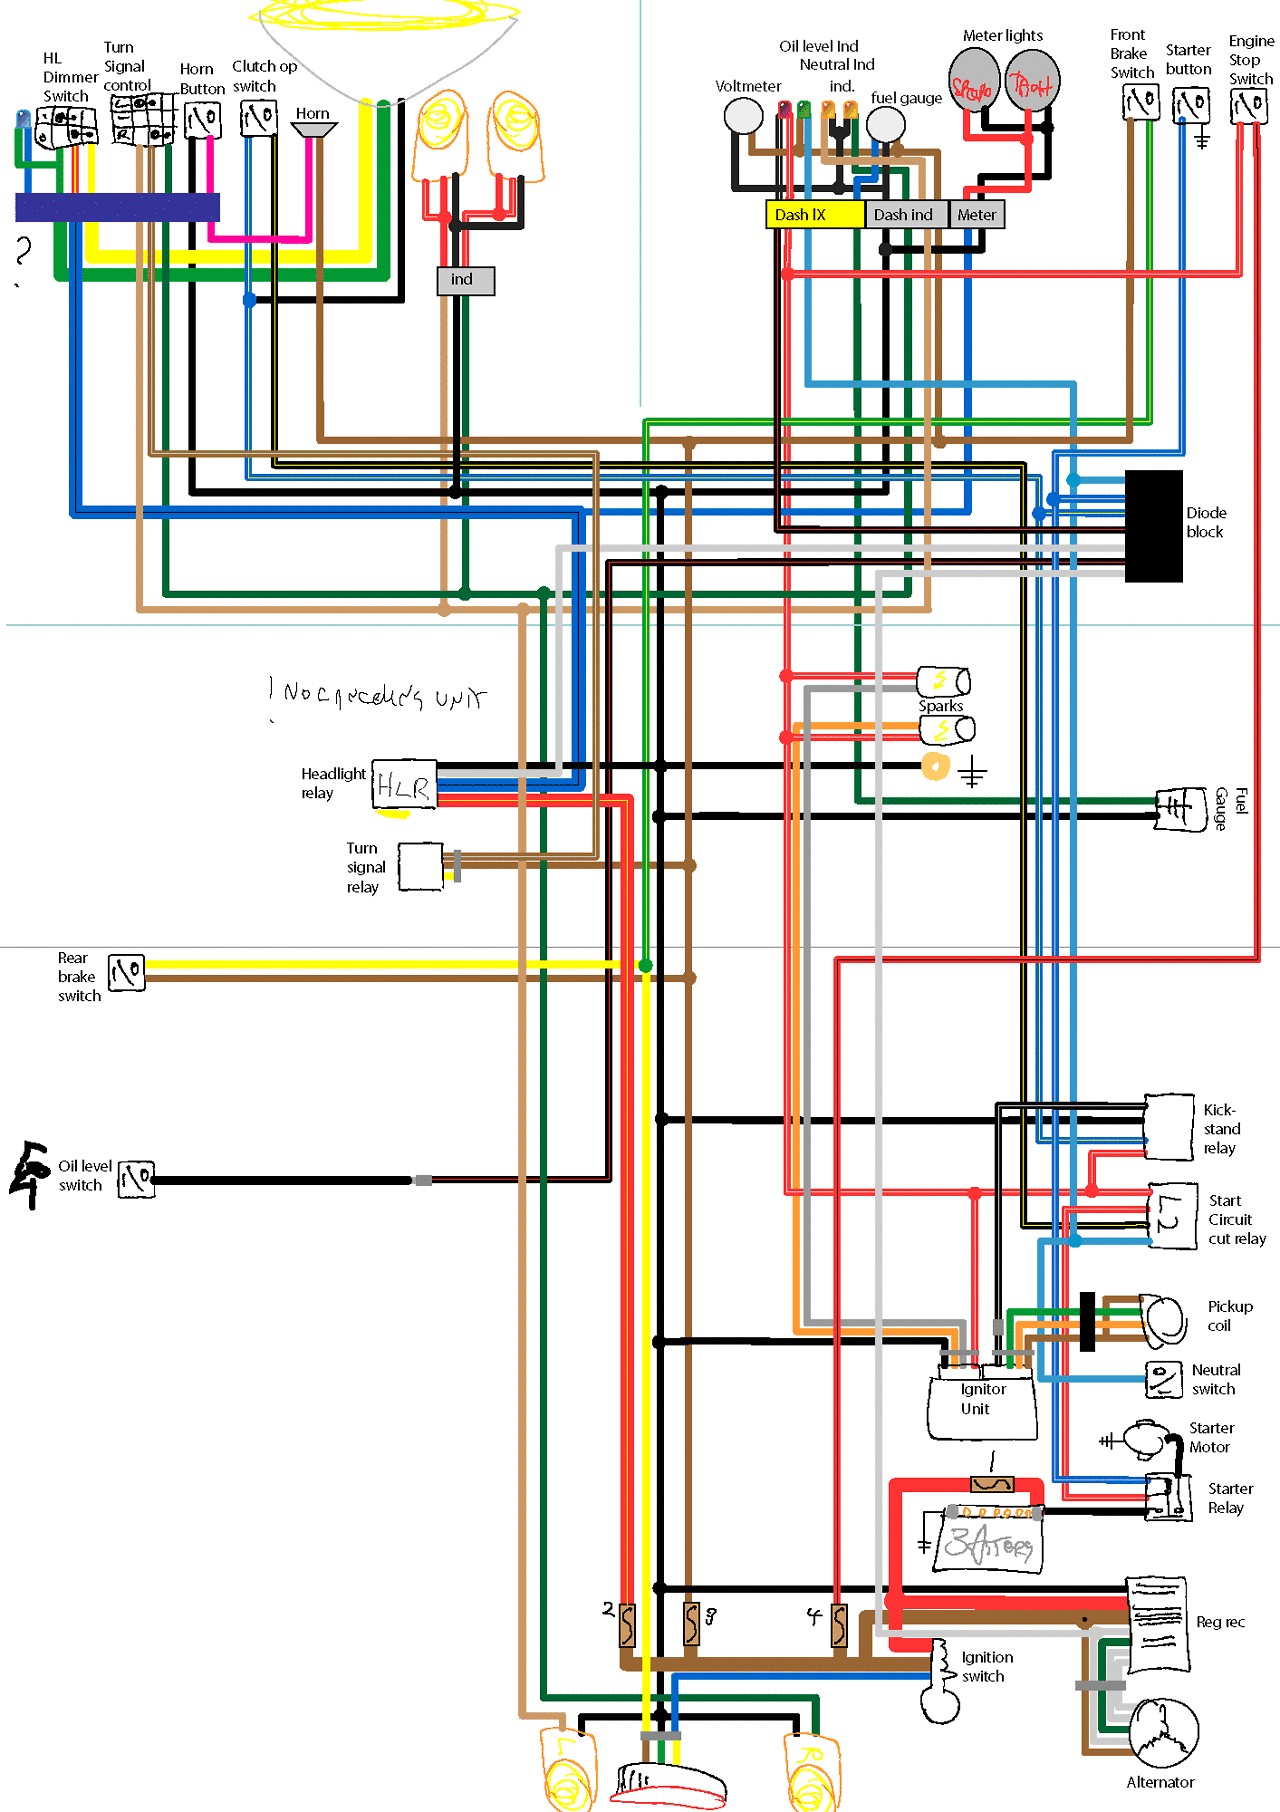 Diagram Of An Engine Land Rover Discovery Wiring Diagram Of Diagram Of An Engine